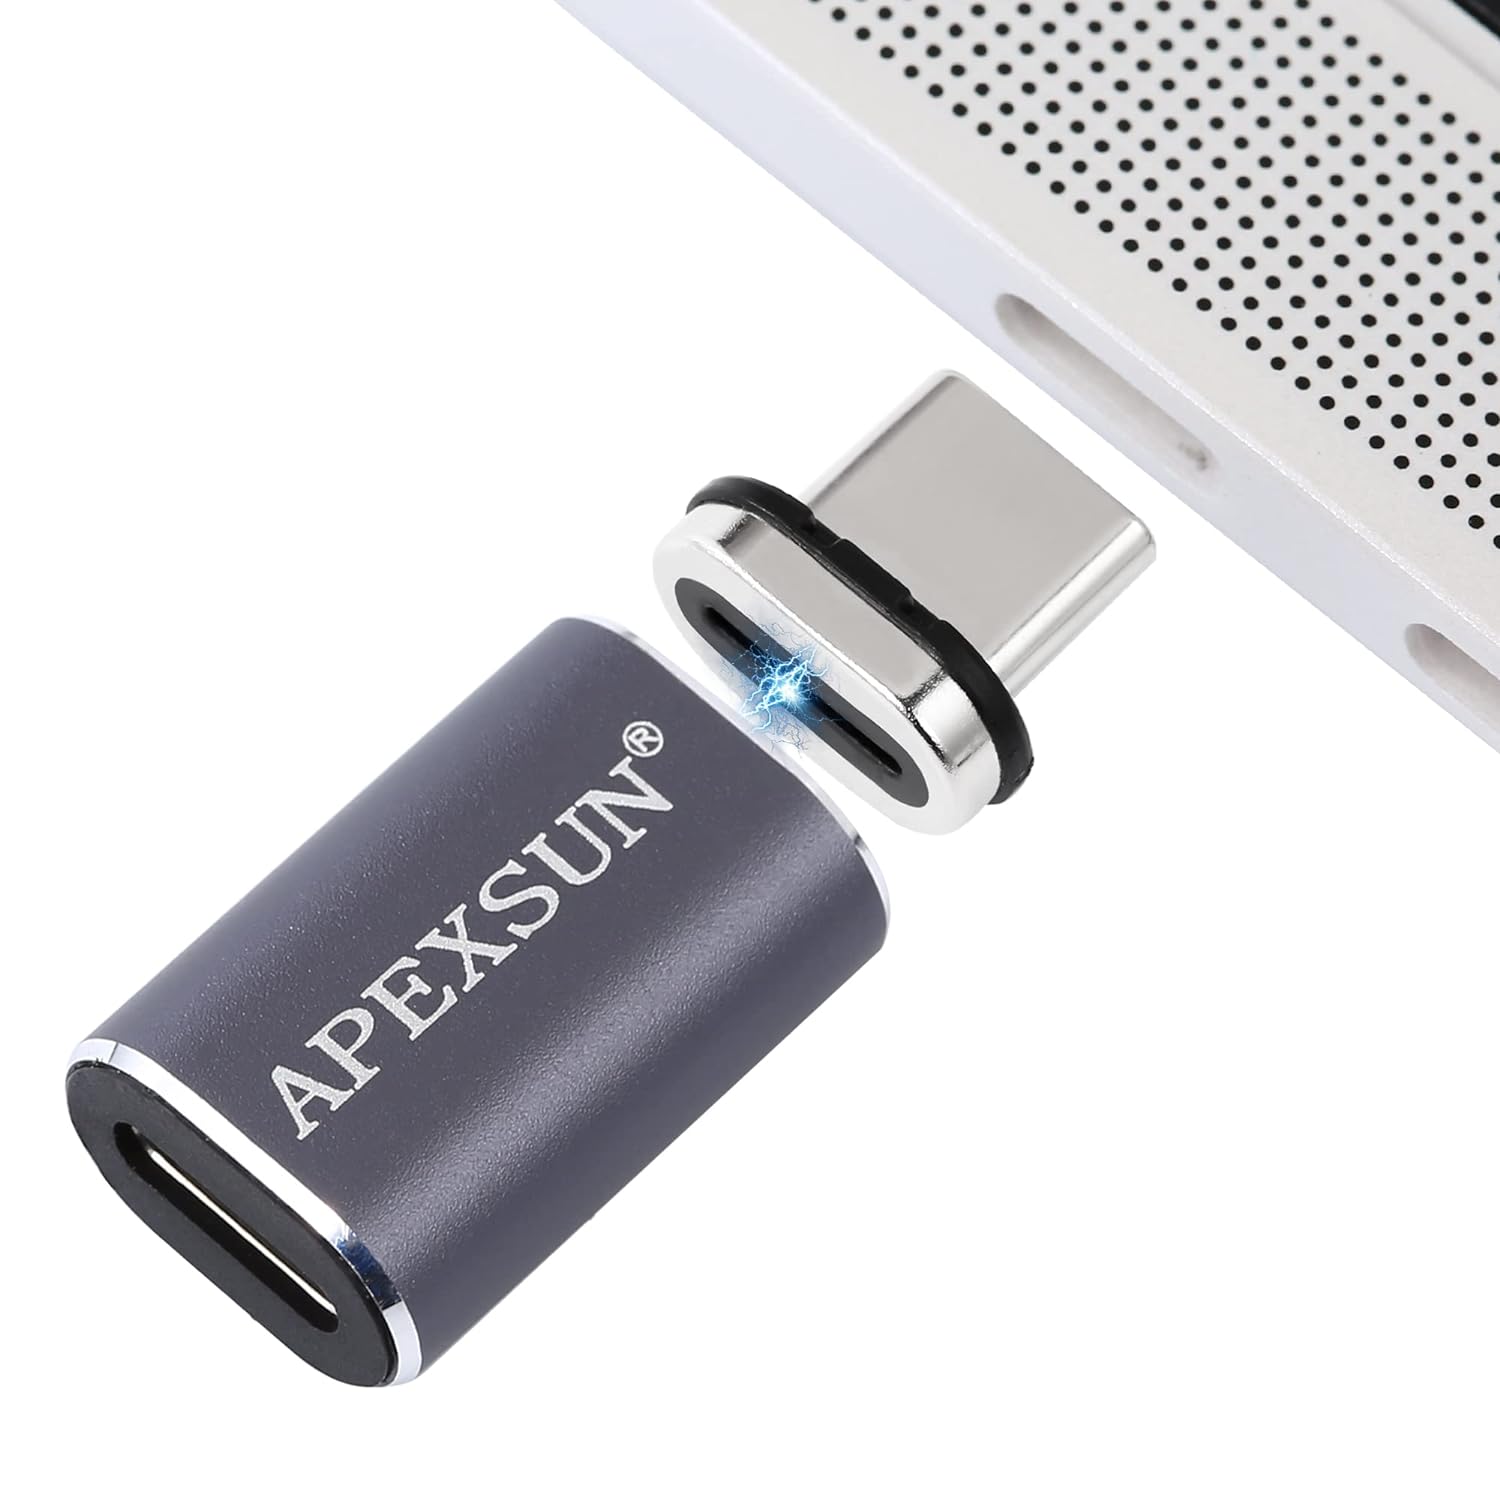 APEXSUN USB C Magnetic Adapter and USB C Connector, USB C Connector Right Angle Support USB PD 100W Quick Charge, Faster Data Transfer Compatible with USB C Devices（Straight, Silver Gray，24-Pin）